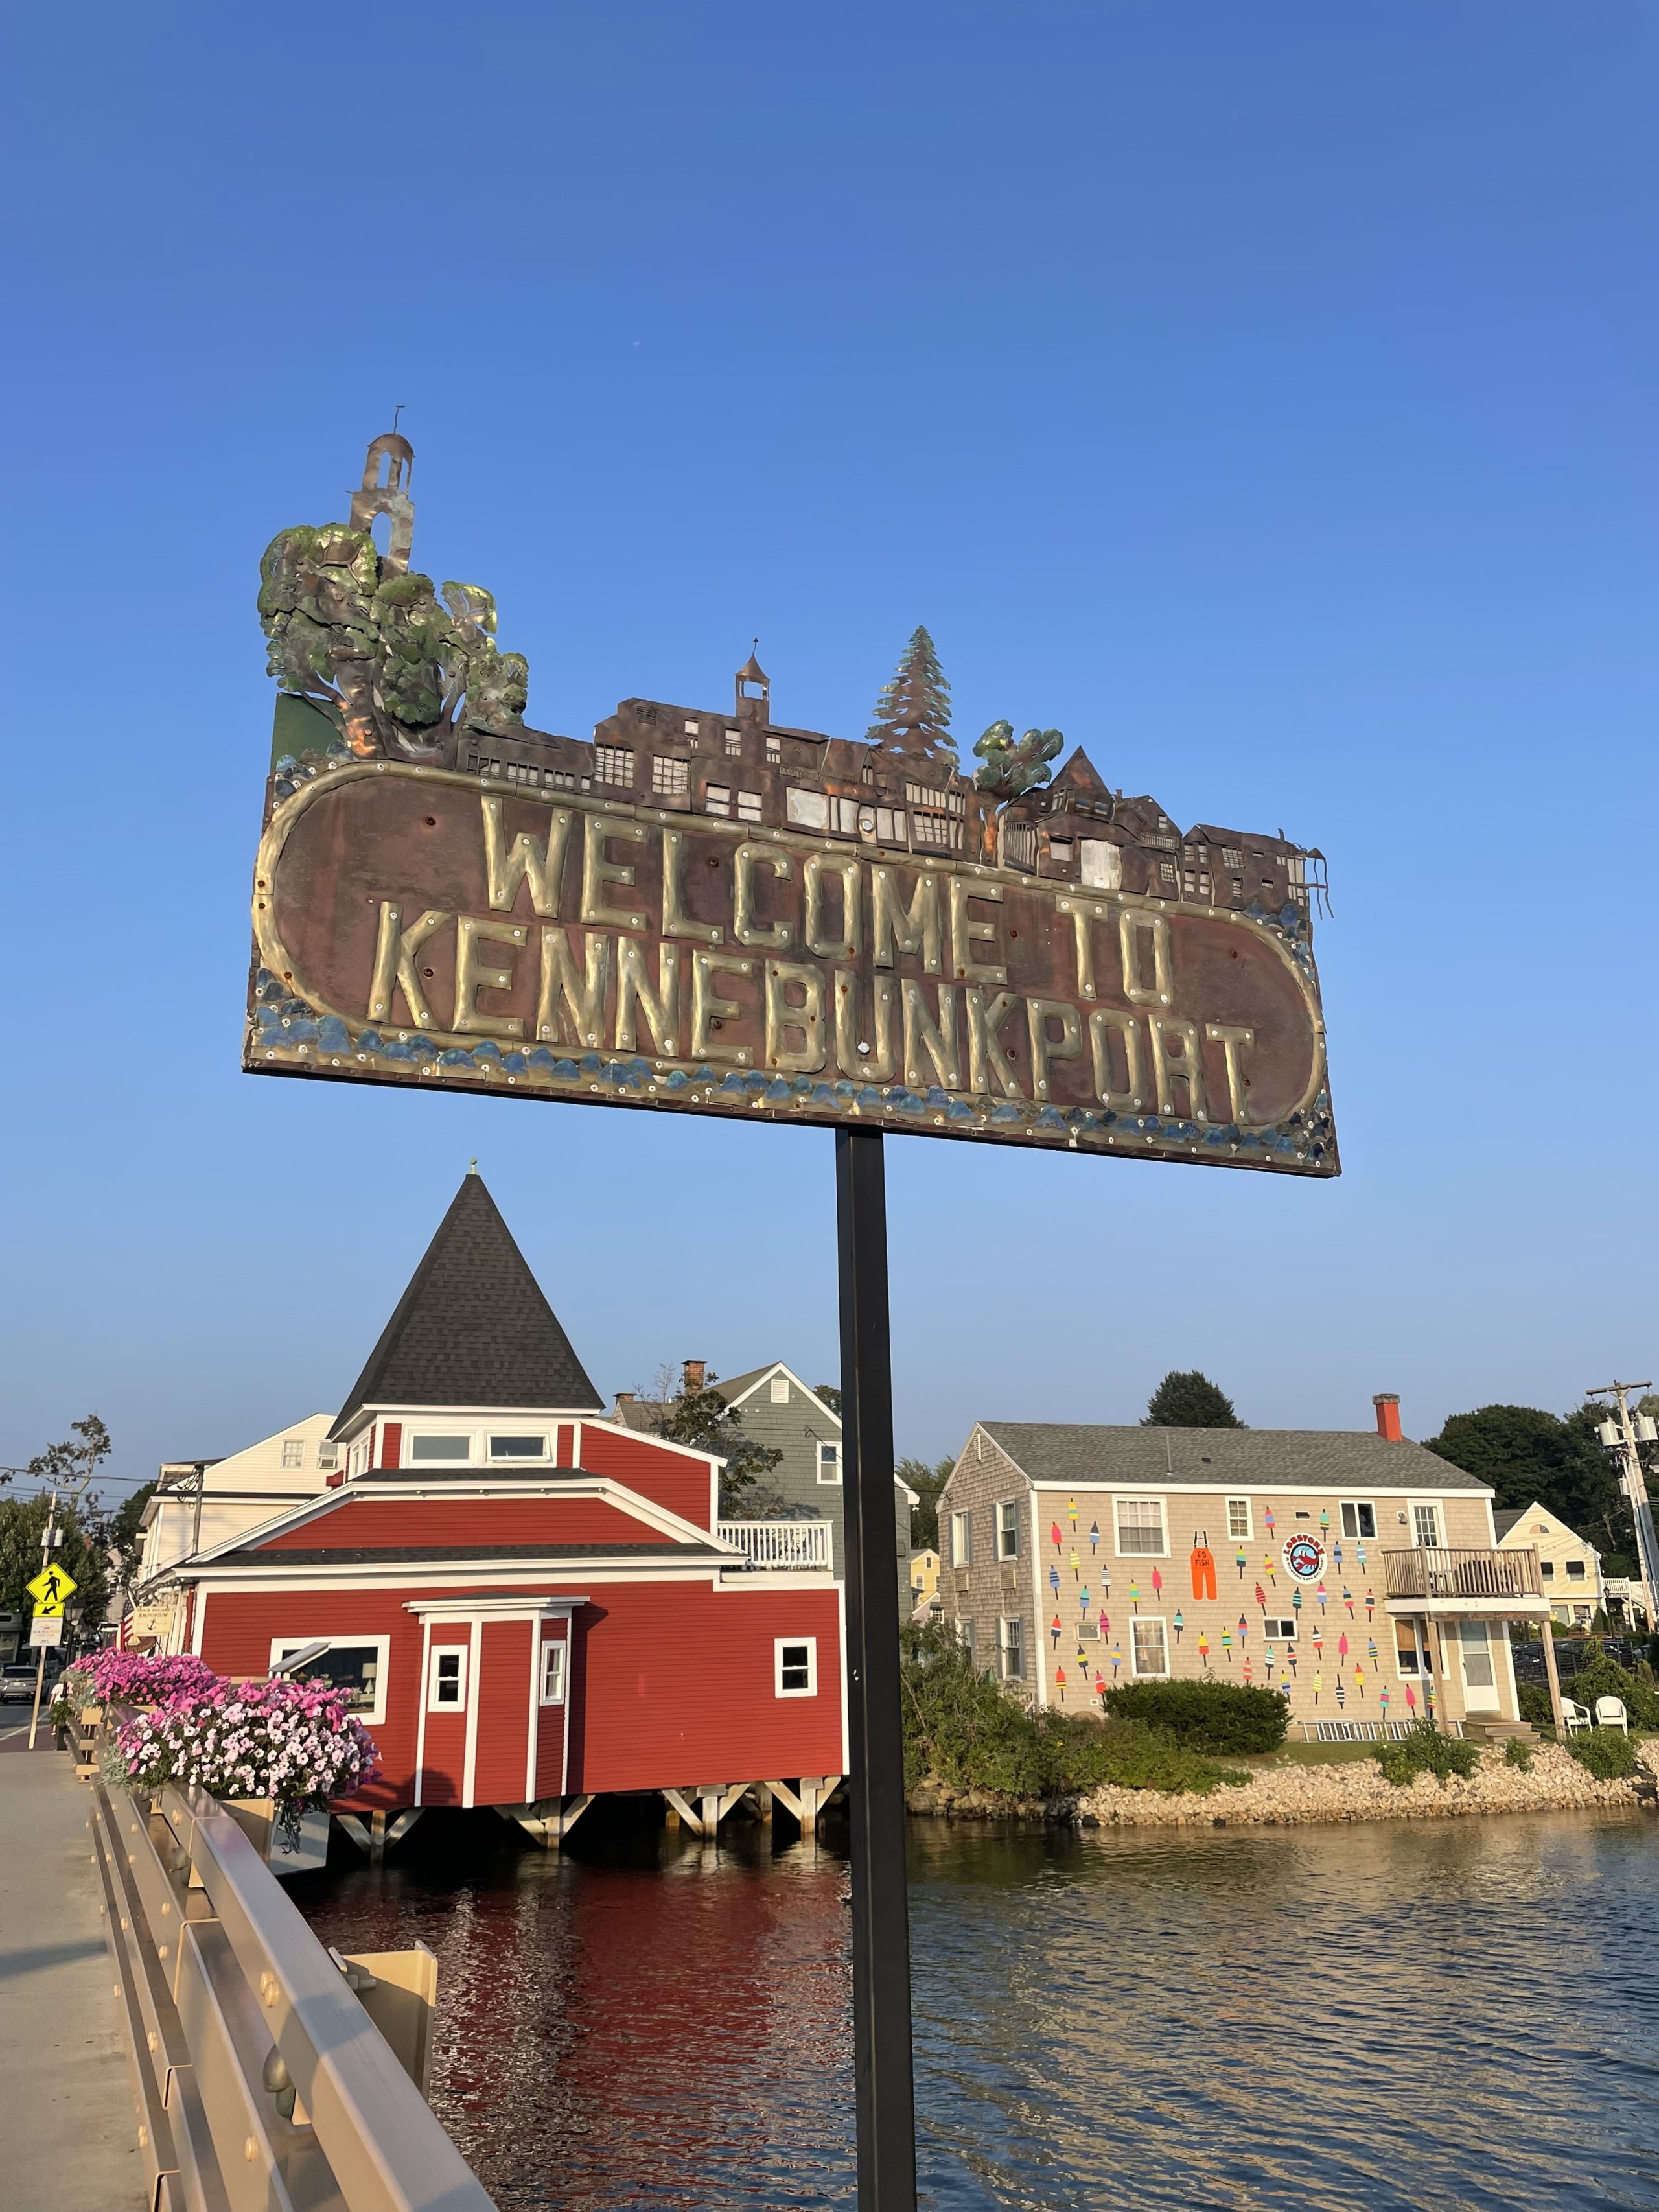 A town featuring a red dockhouse and a sign reading "Welcome to Kennebunkport".